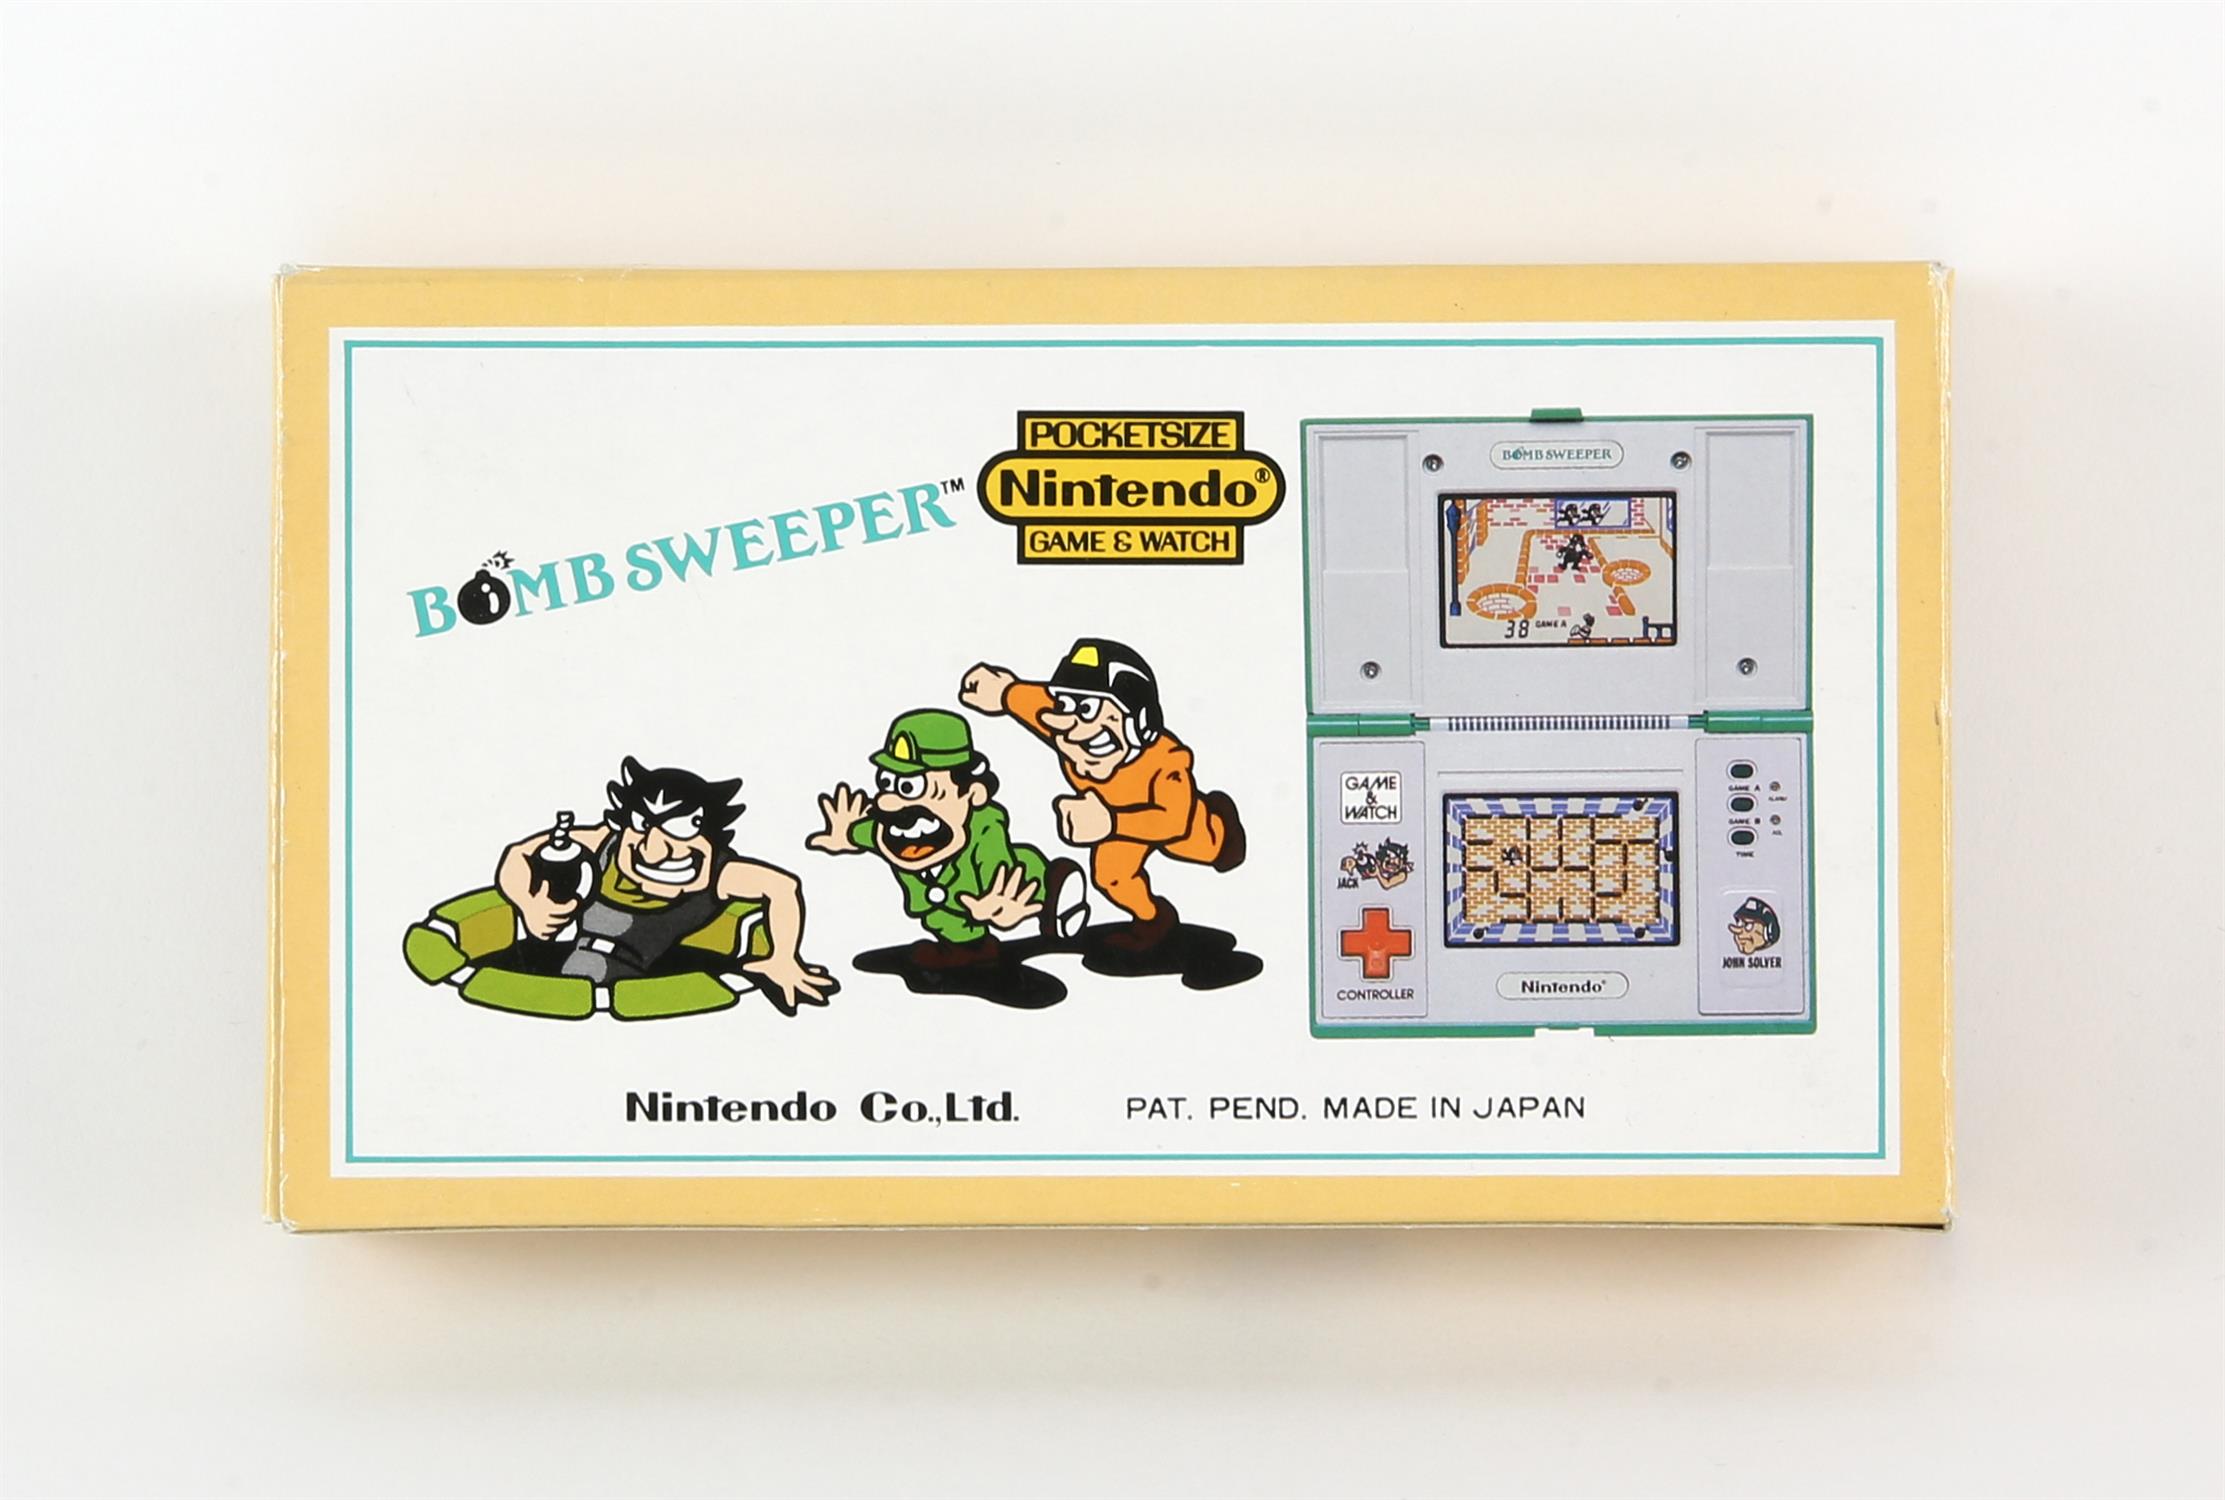 Nintendo Game & Watch [BD-62] Bomb Sweeper handheld console - Image 2 of 2